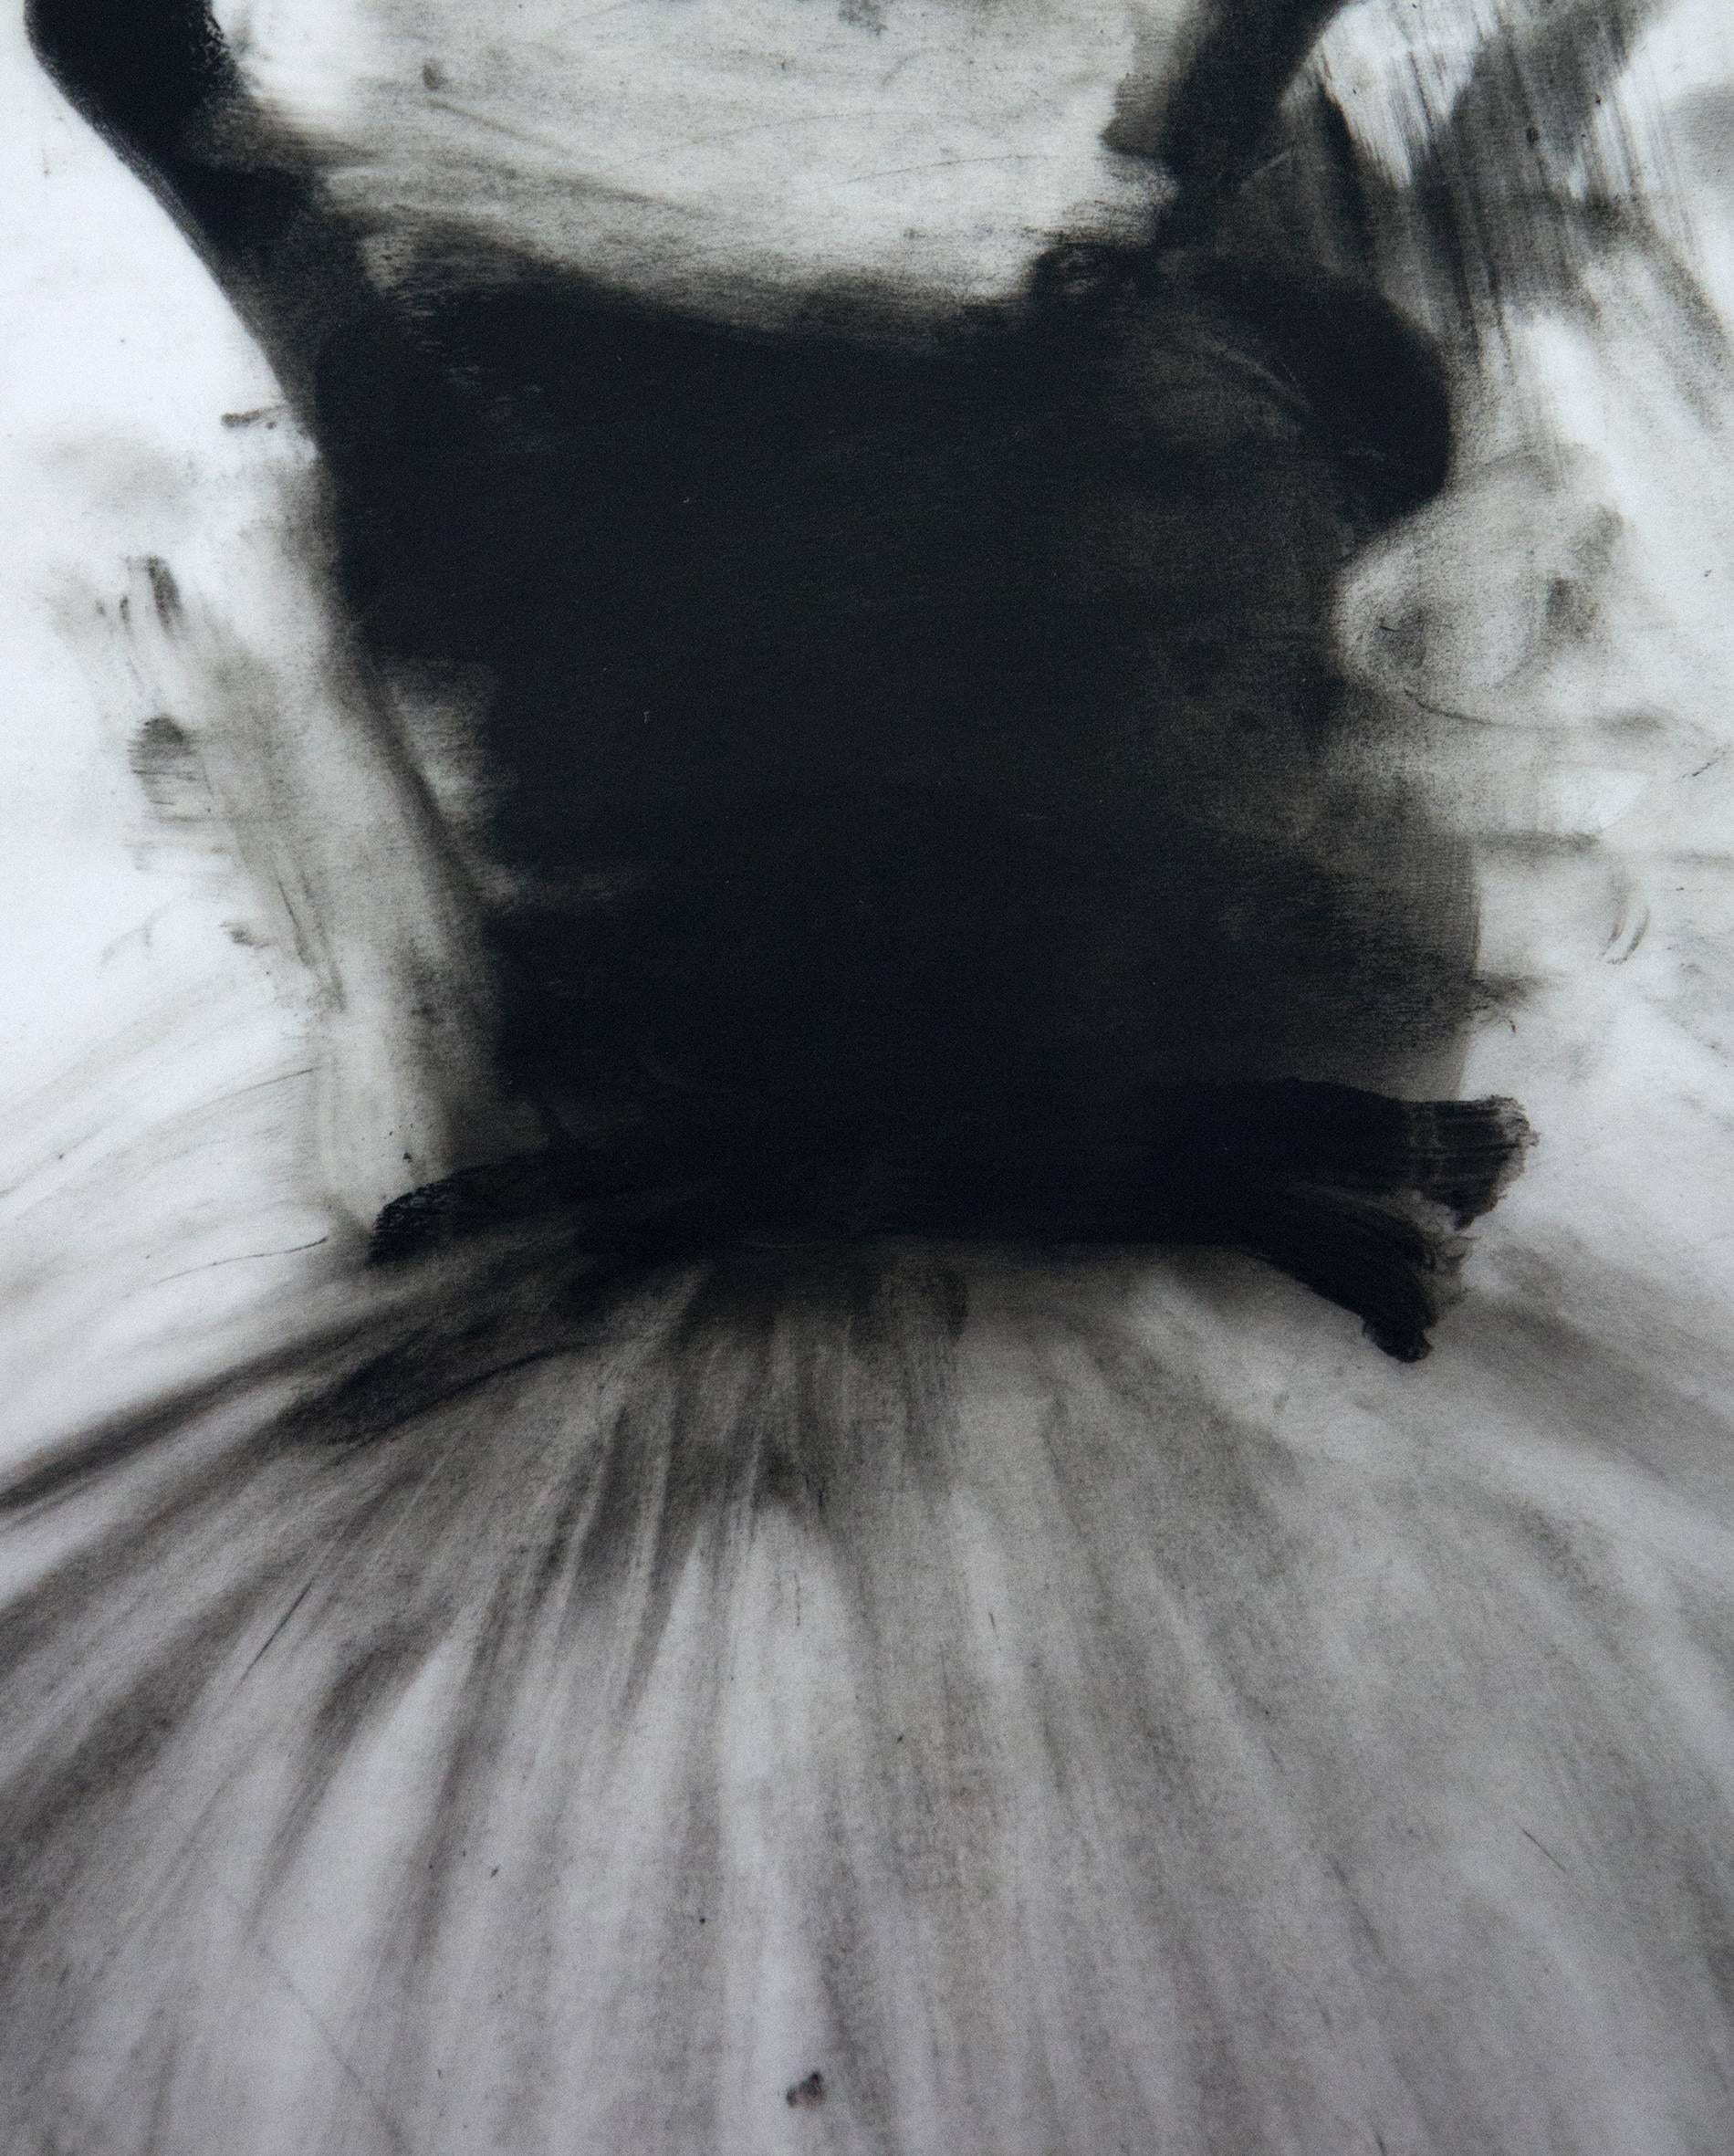 Dancer, Arms Raised - Gray Figurative Art by Cathy Daley